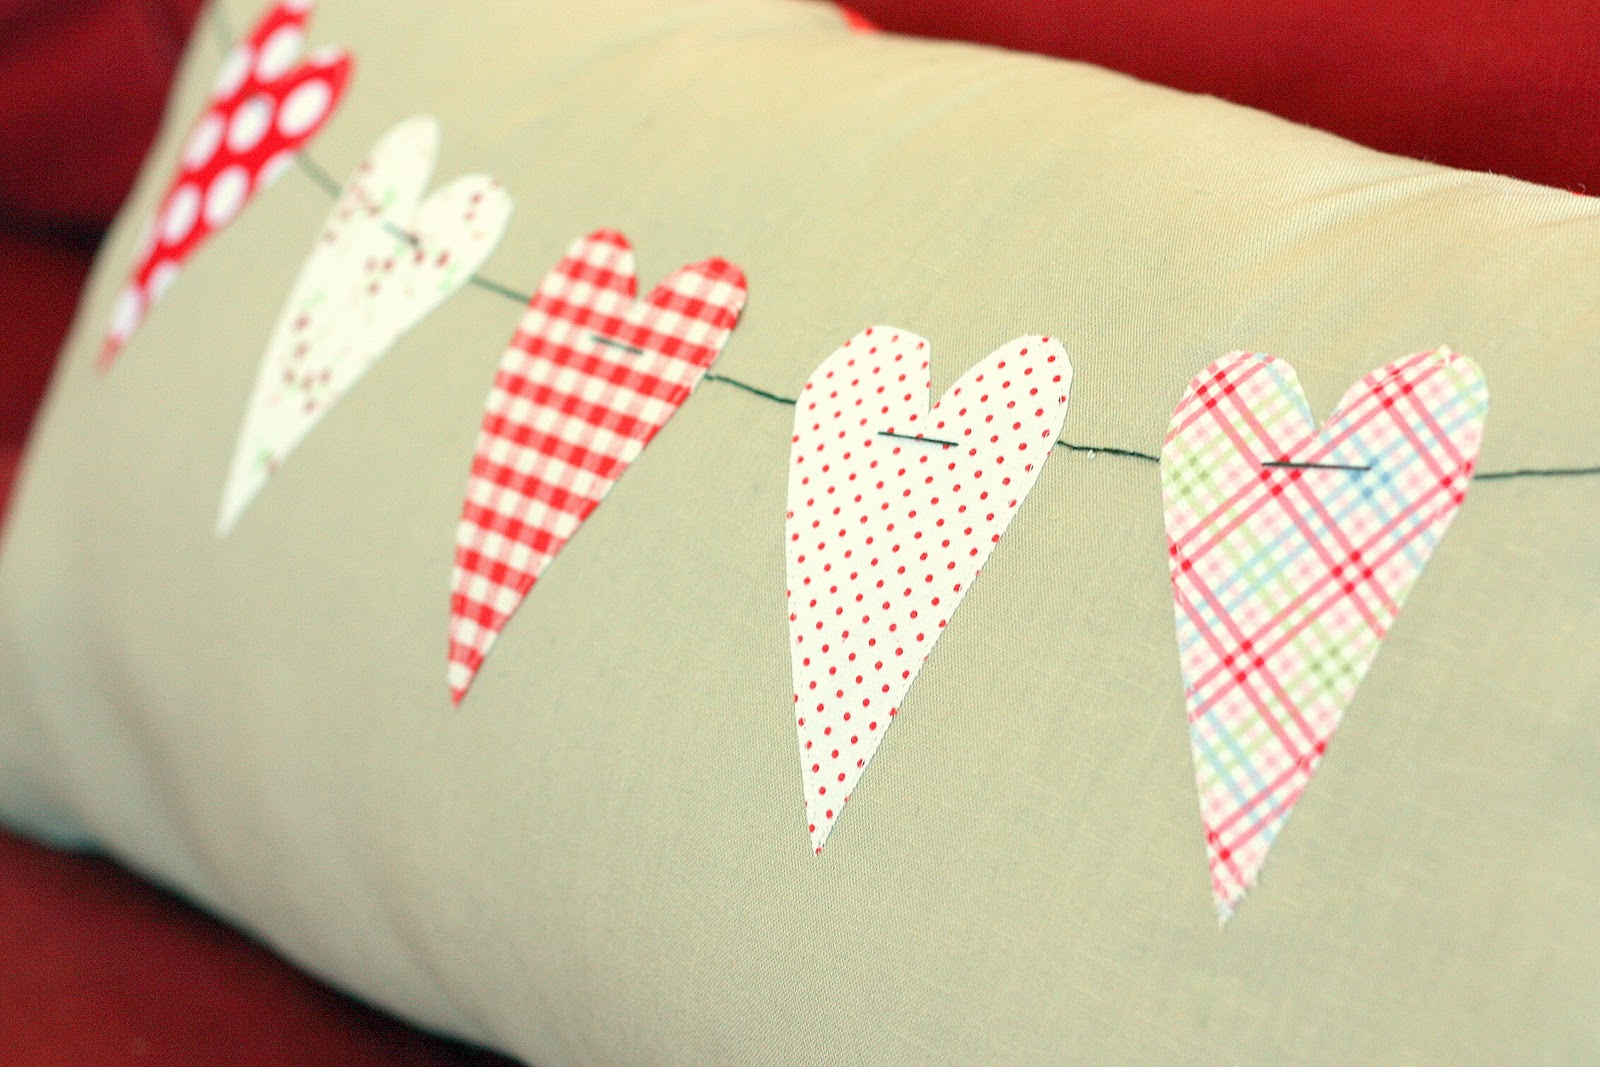 Diary of a Quilter - a quilt blog: A little Valentine's pillow ...